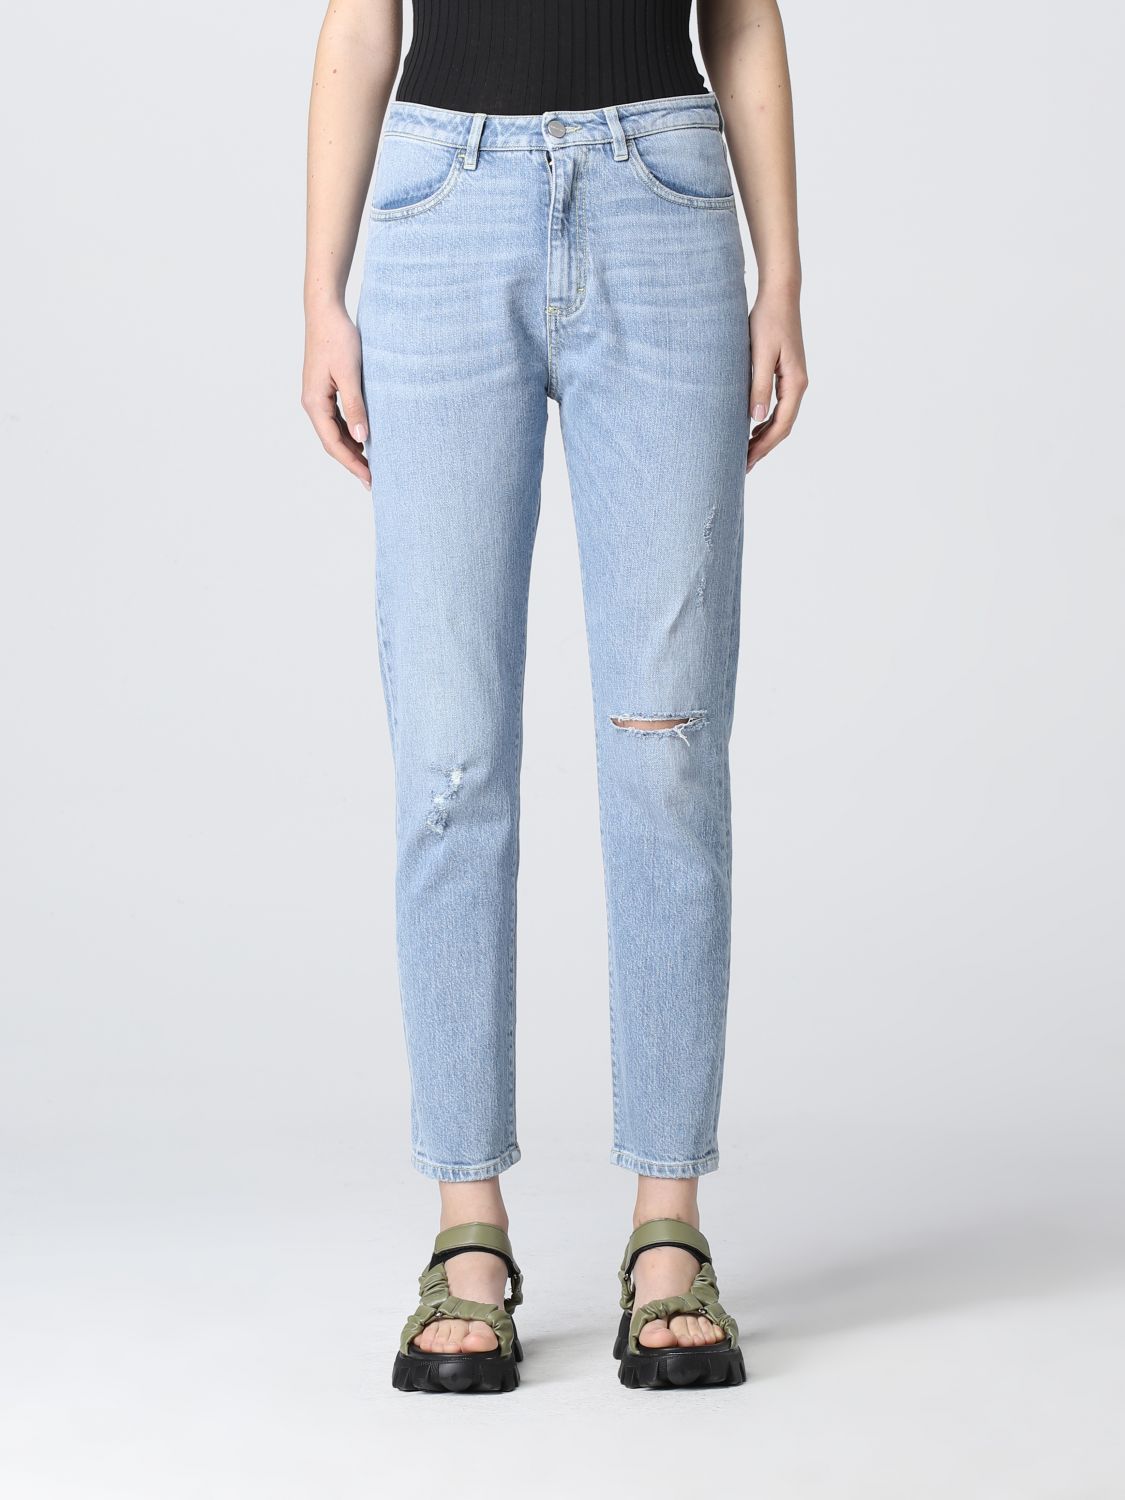 Jeans Icon Denim Los Angeles: Icon Denim Los Angeles jeans in ripped denim stone washed 1